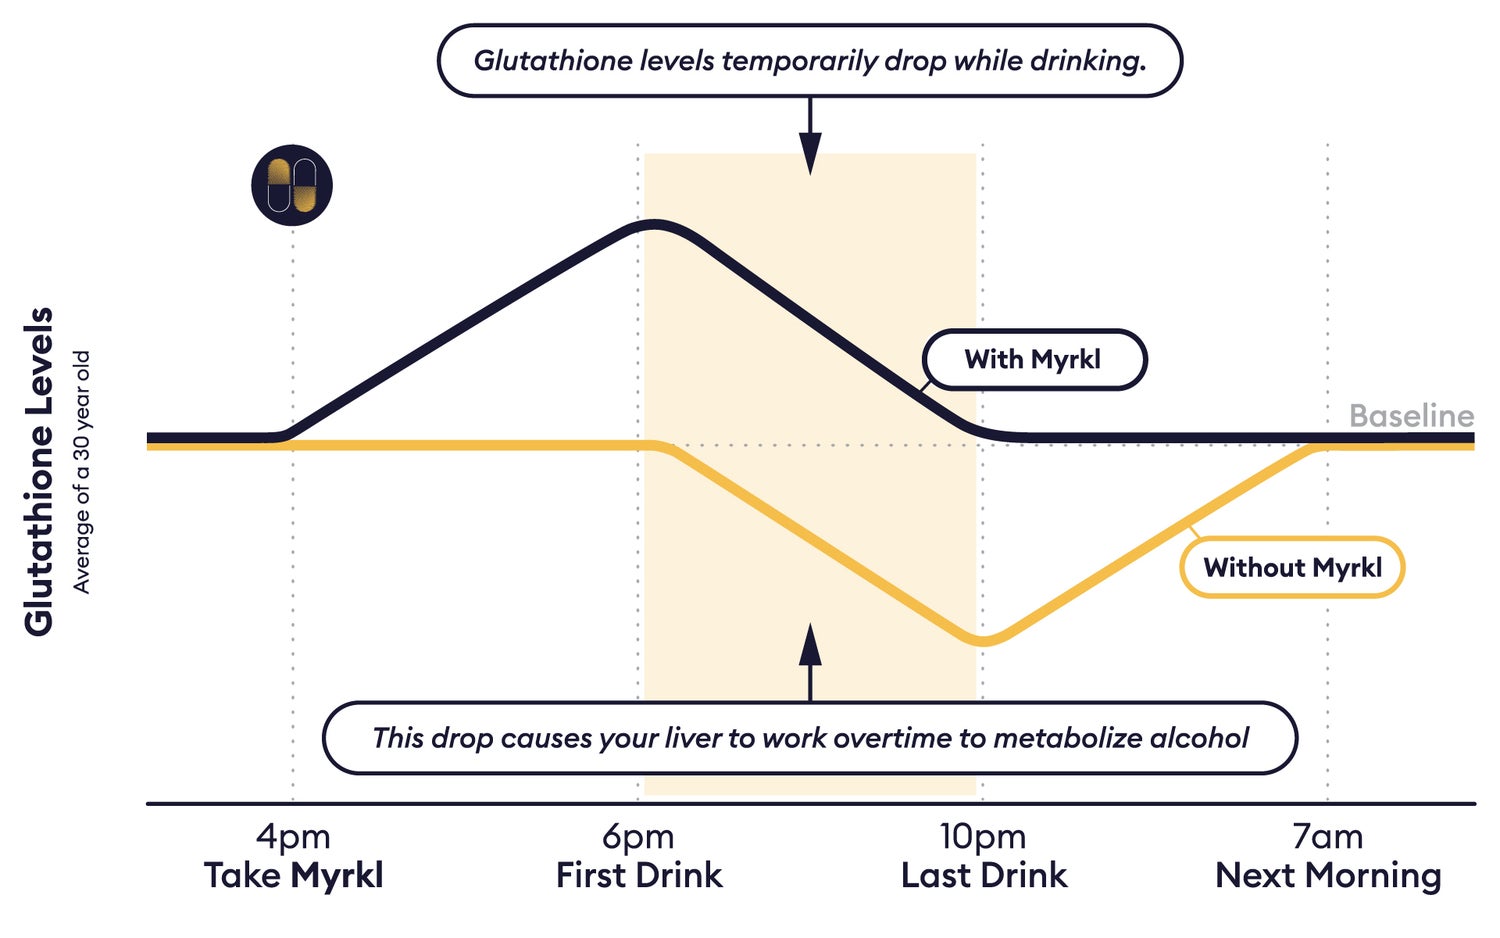 As you age (starting between age 25-30), your glutathione levels naturally decrease — and that's regardless of whether or not you consume alcohol. For those who drink, this natural decline means that your liver isn’t metabolizing alcohol as efficiently as it did in your early 20s. Taking a dose of Myrkl will increase your glutathione levels over time so that your liver can process alcohol more effectively.